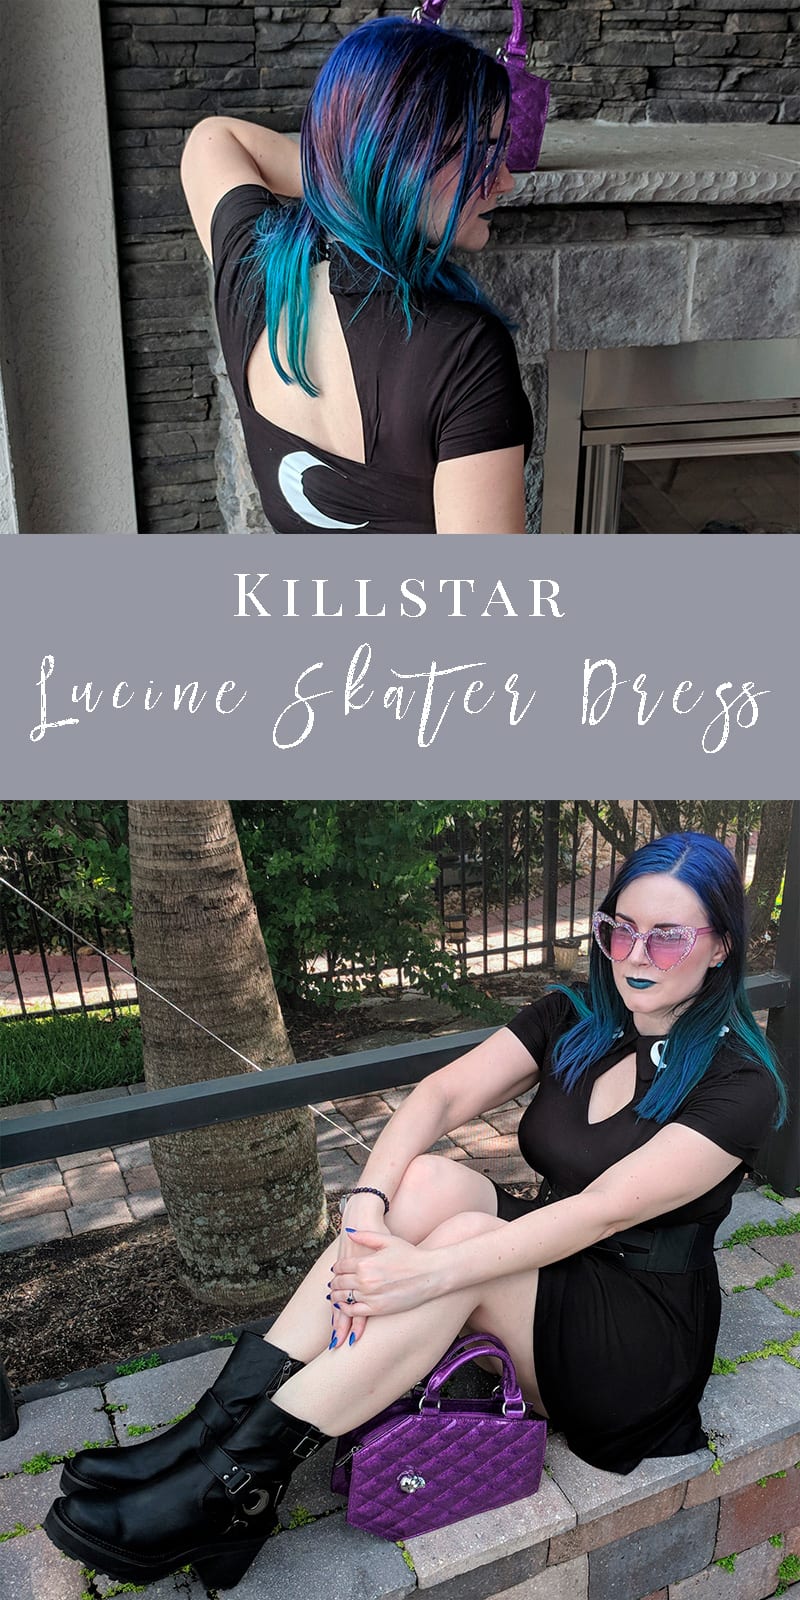 I LOVE this Killstar Lucine Skater Dress! The collar reads Moon Child. It has a key hole detail on front and a cut out detail on back with a moon. Perfect fit & flare dress! #killstar #gothicfashion #witchystyle #LTKcurves #streetgoth #plussizefashion